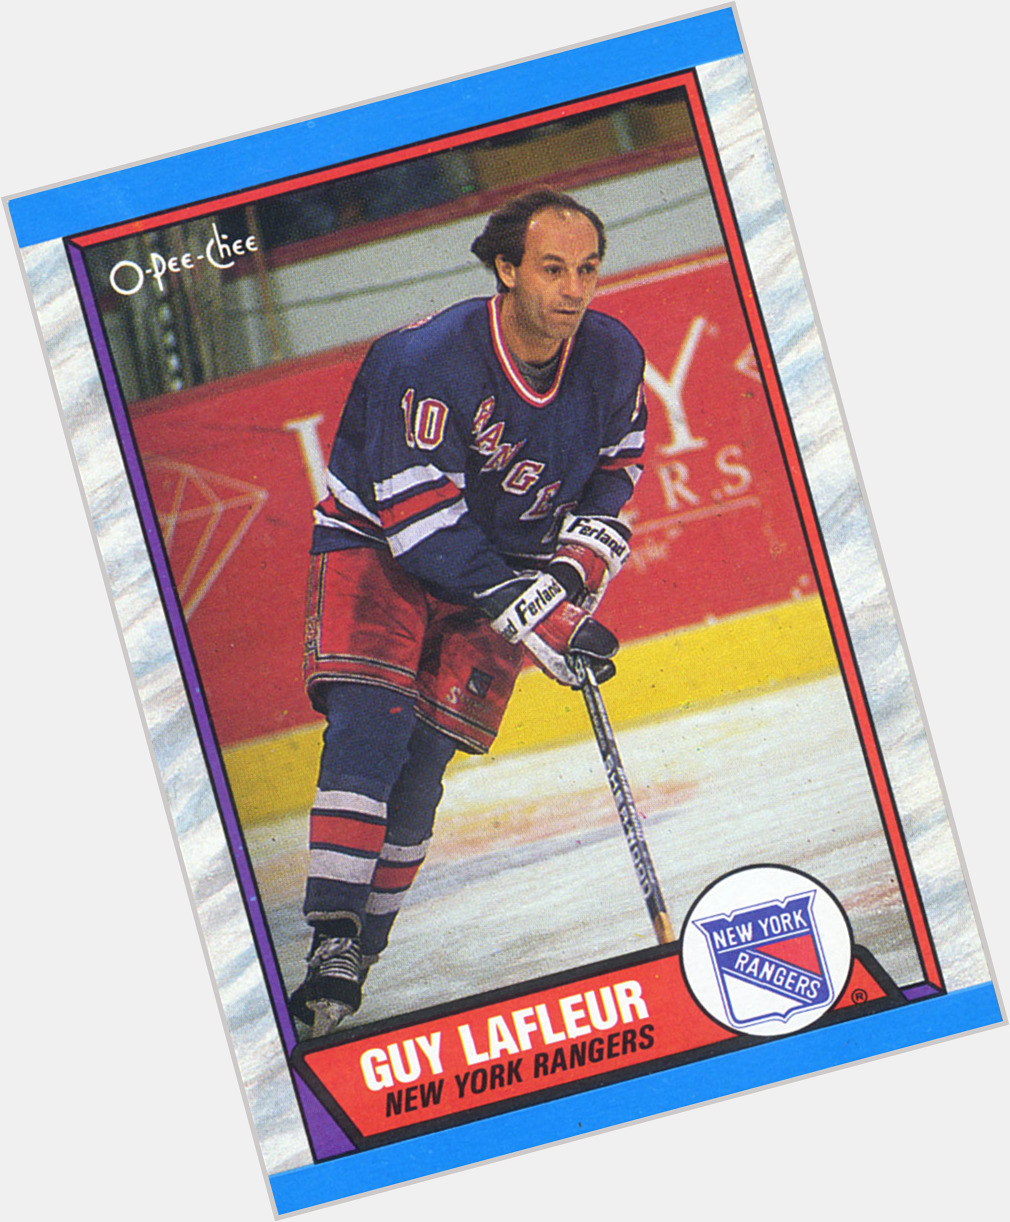 (An Alternate) Happy Birthday message for Guy Lafleur. 